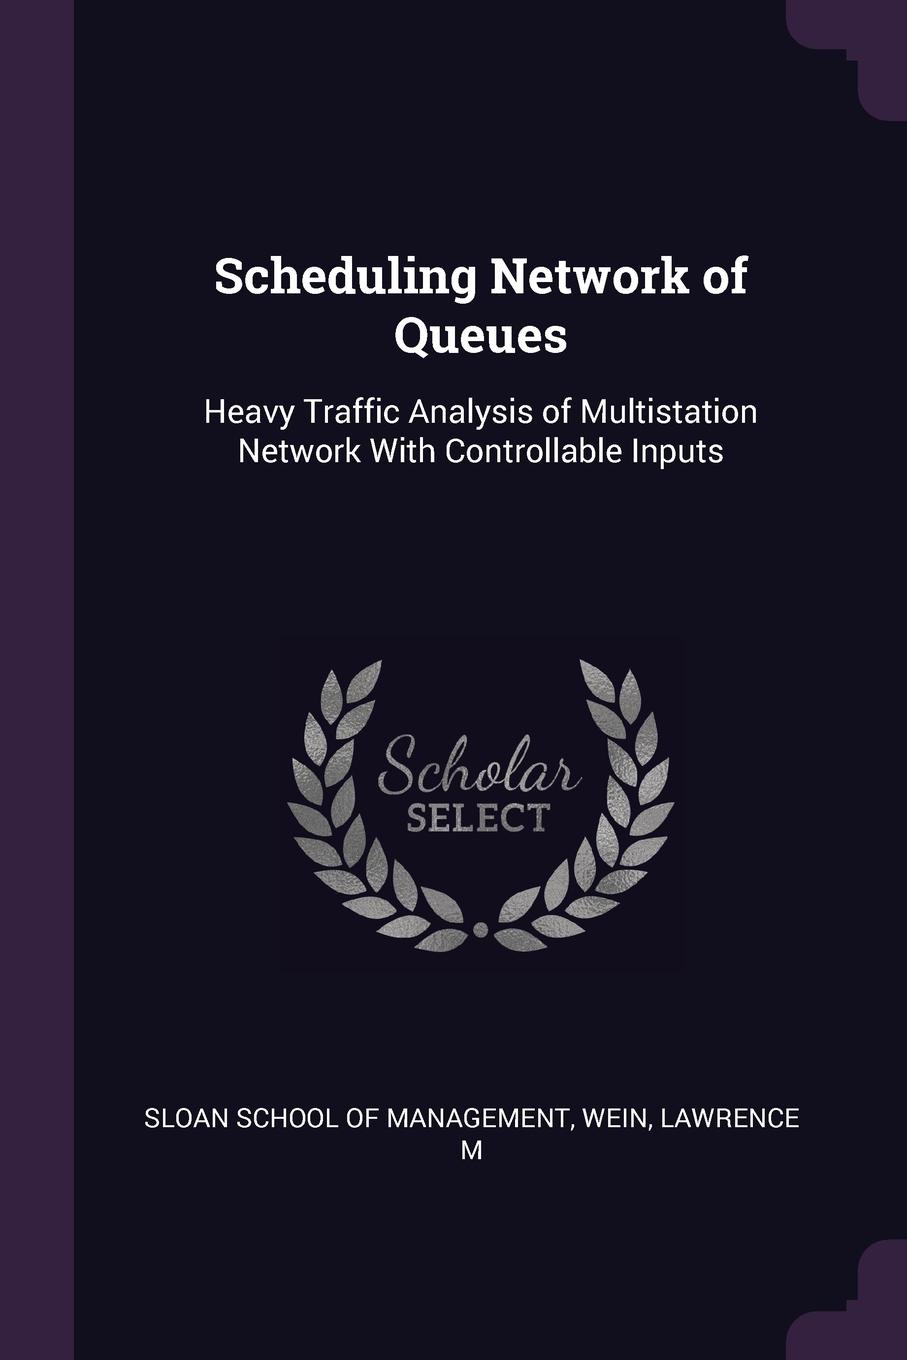 Scheduling Network of Queues. Heavy Traffic Analysis of Multistation Network With Controllable Inputs